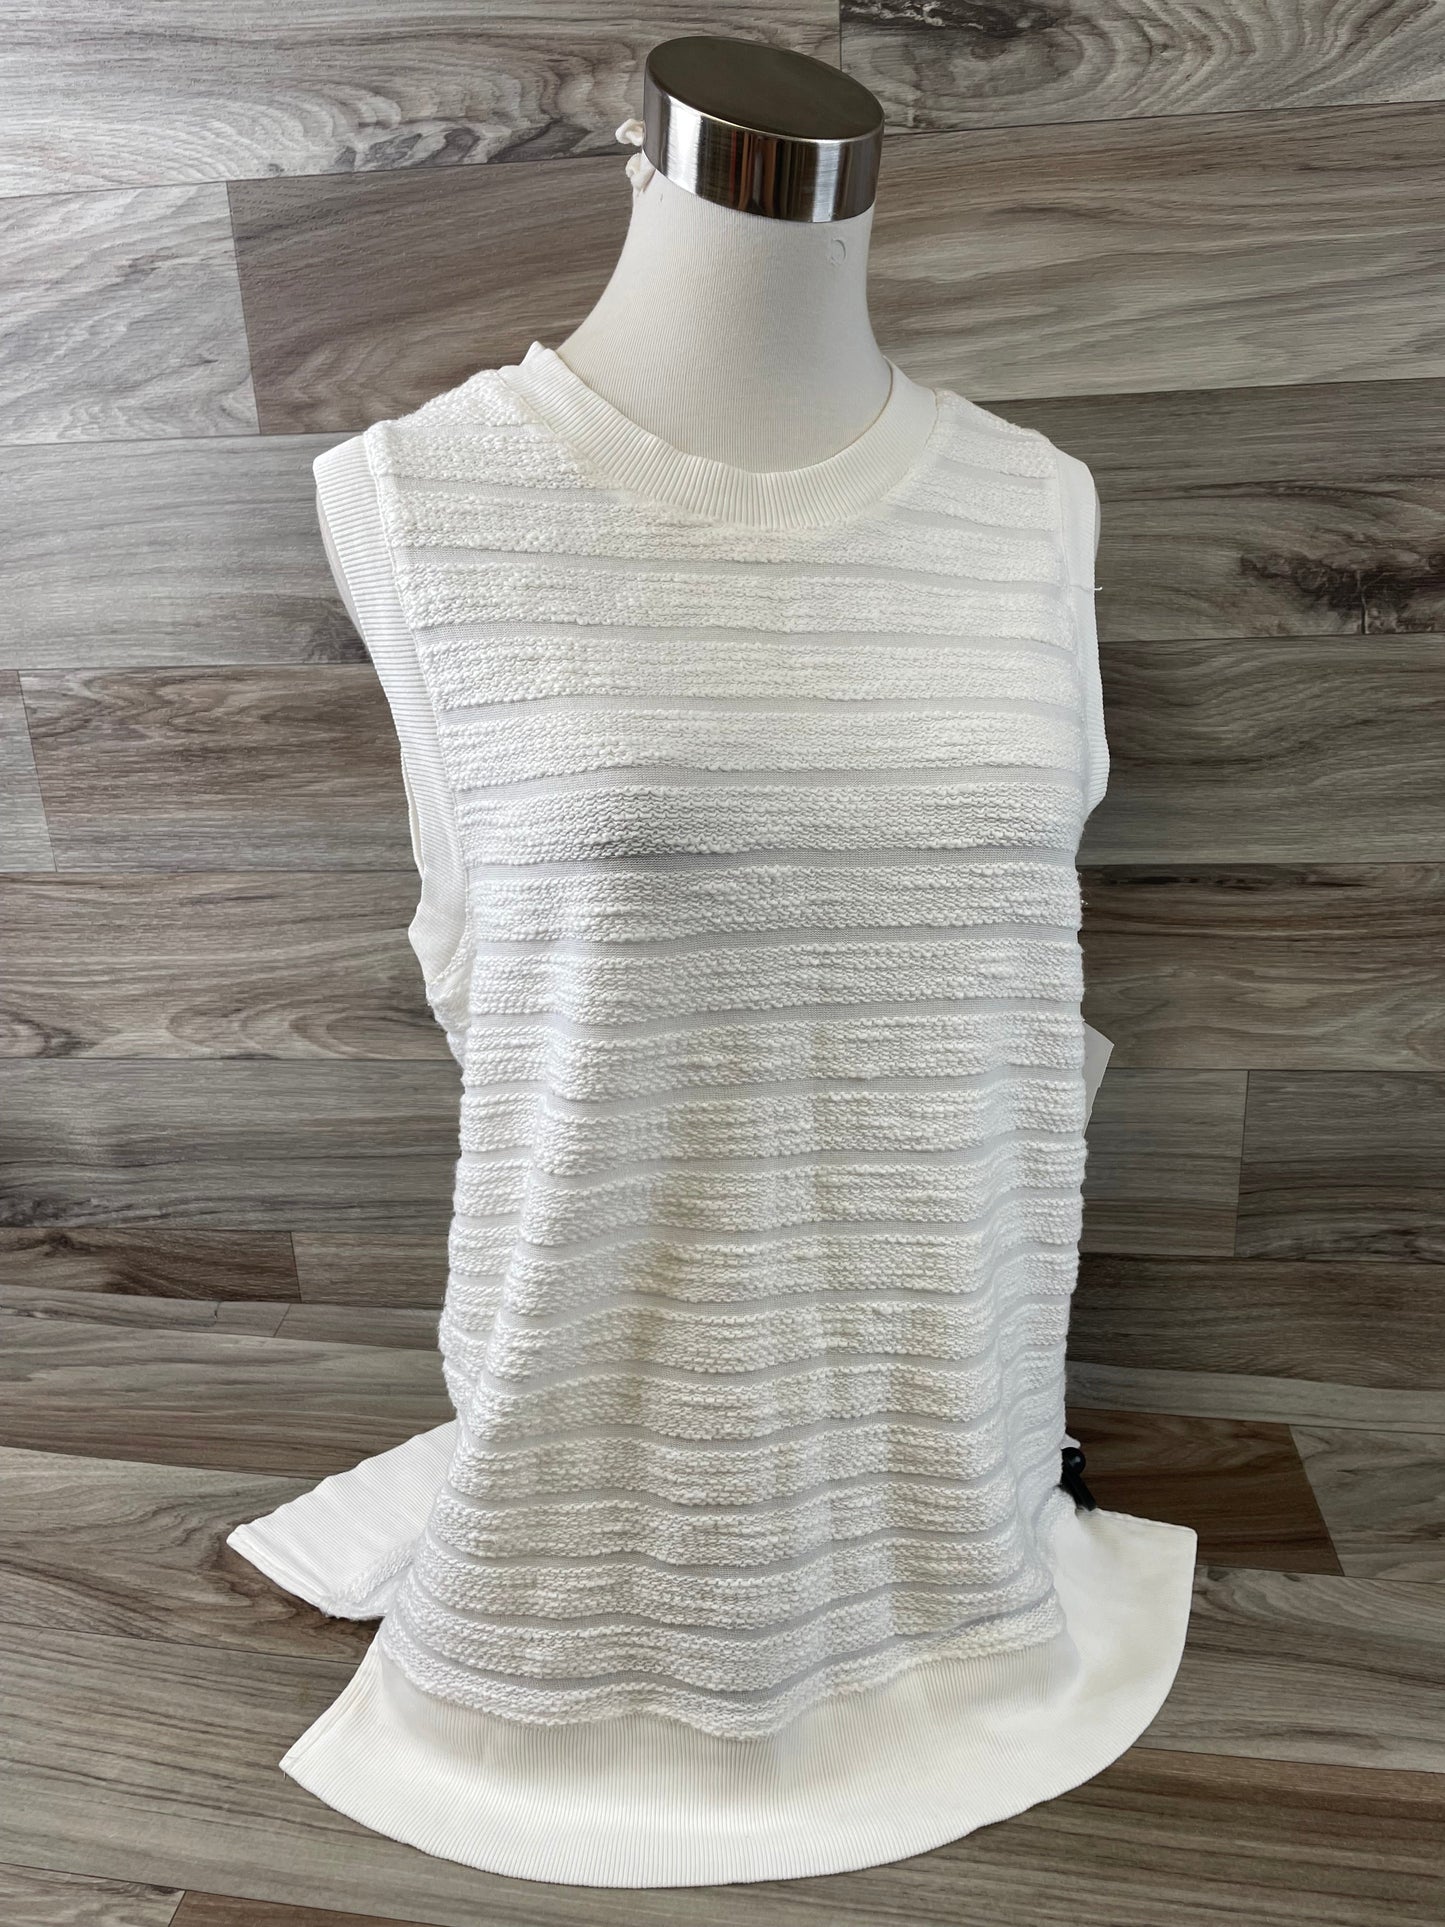 White Top Sleeveless Lou And Grey, Size M